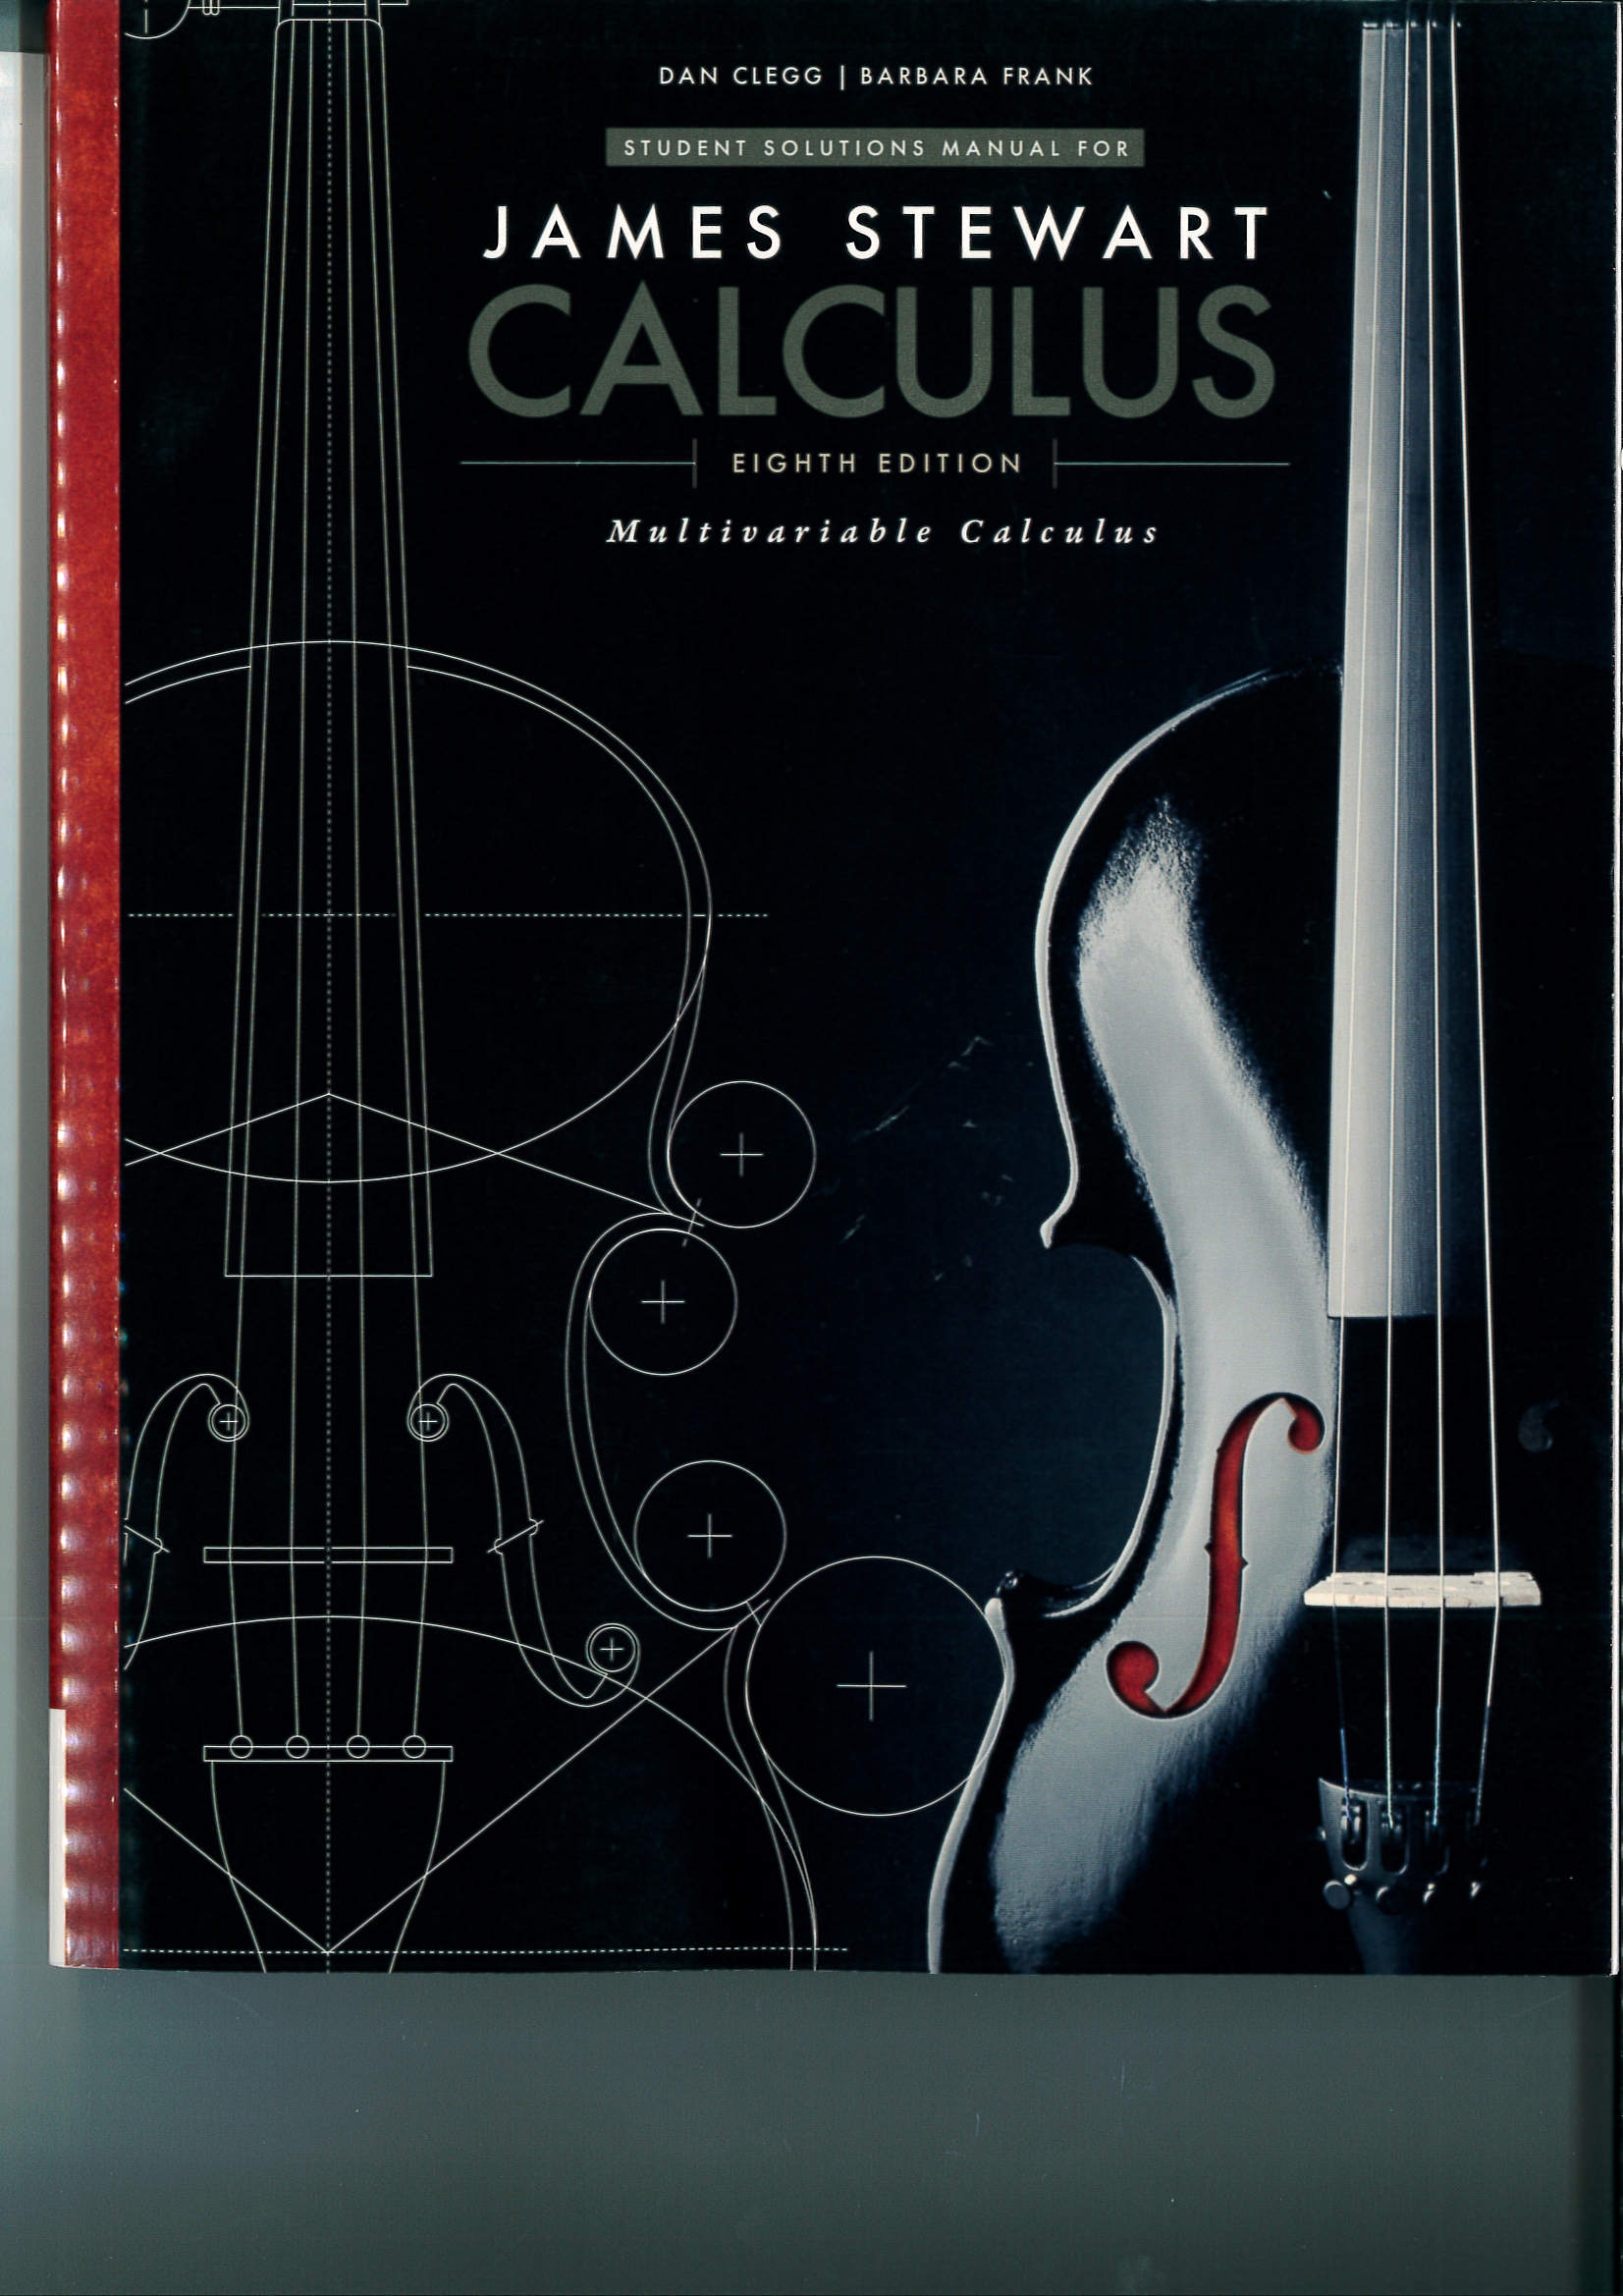 Student solutions manual for Multivariable calculus